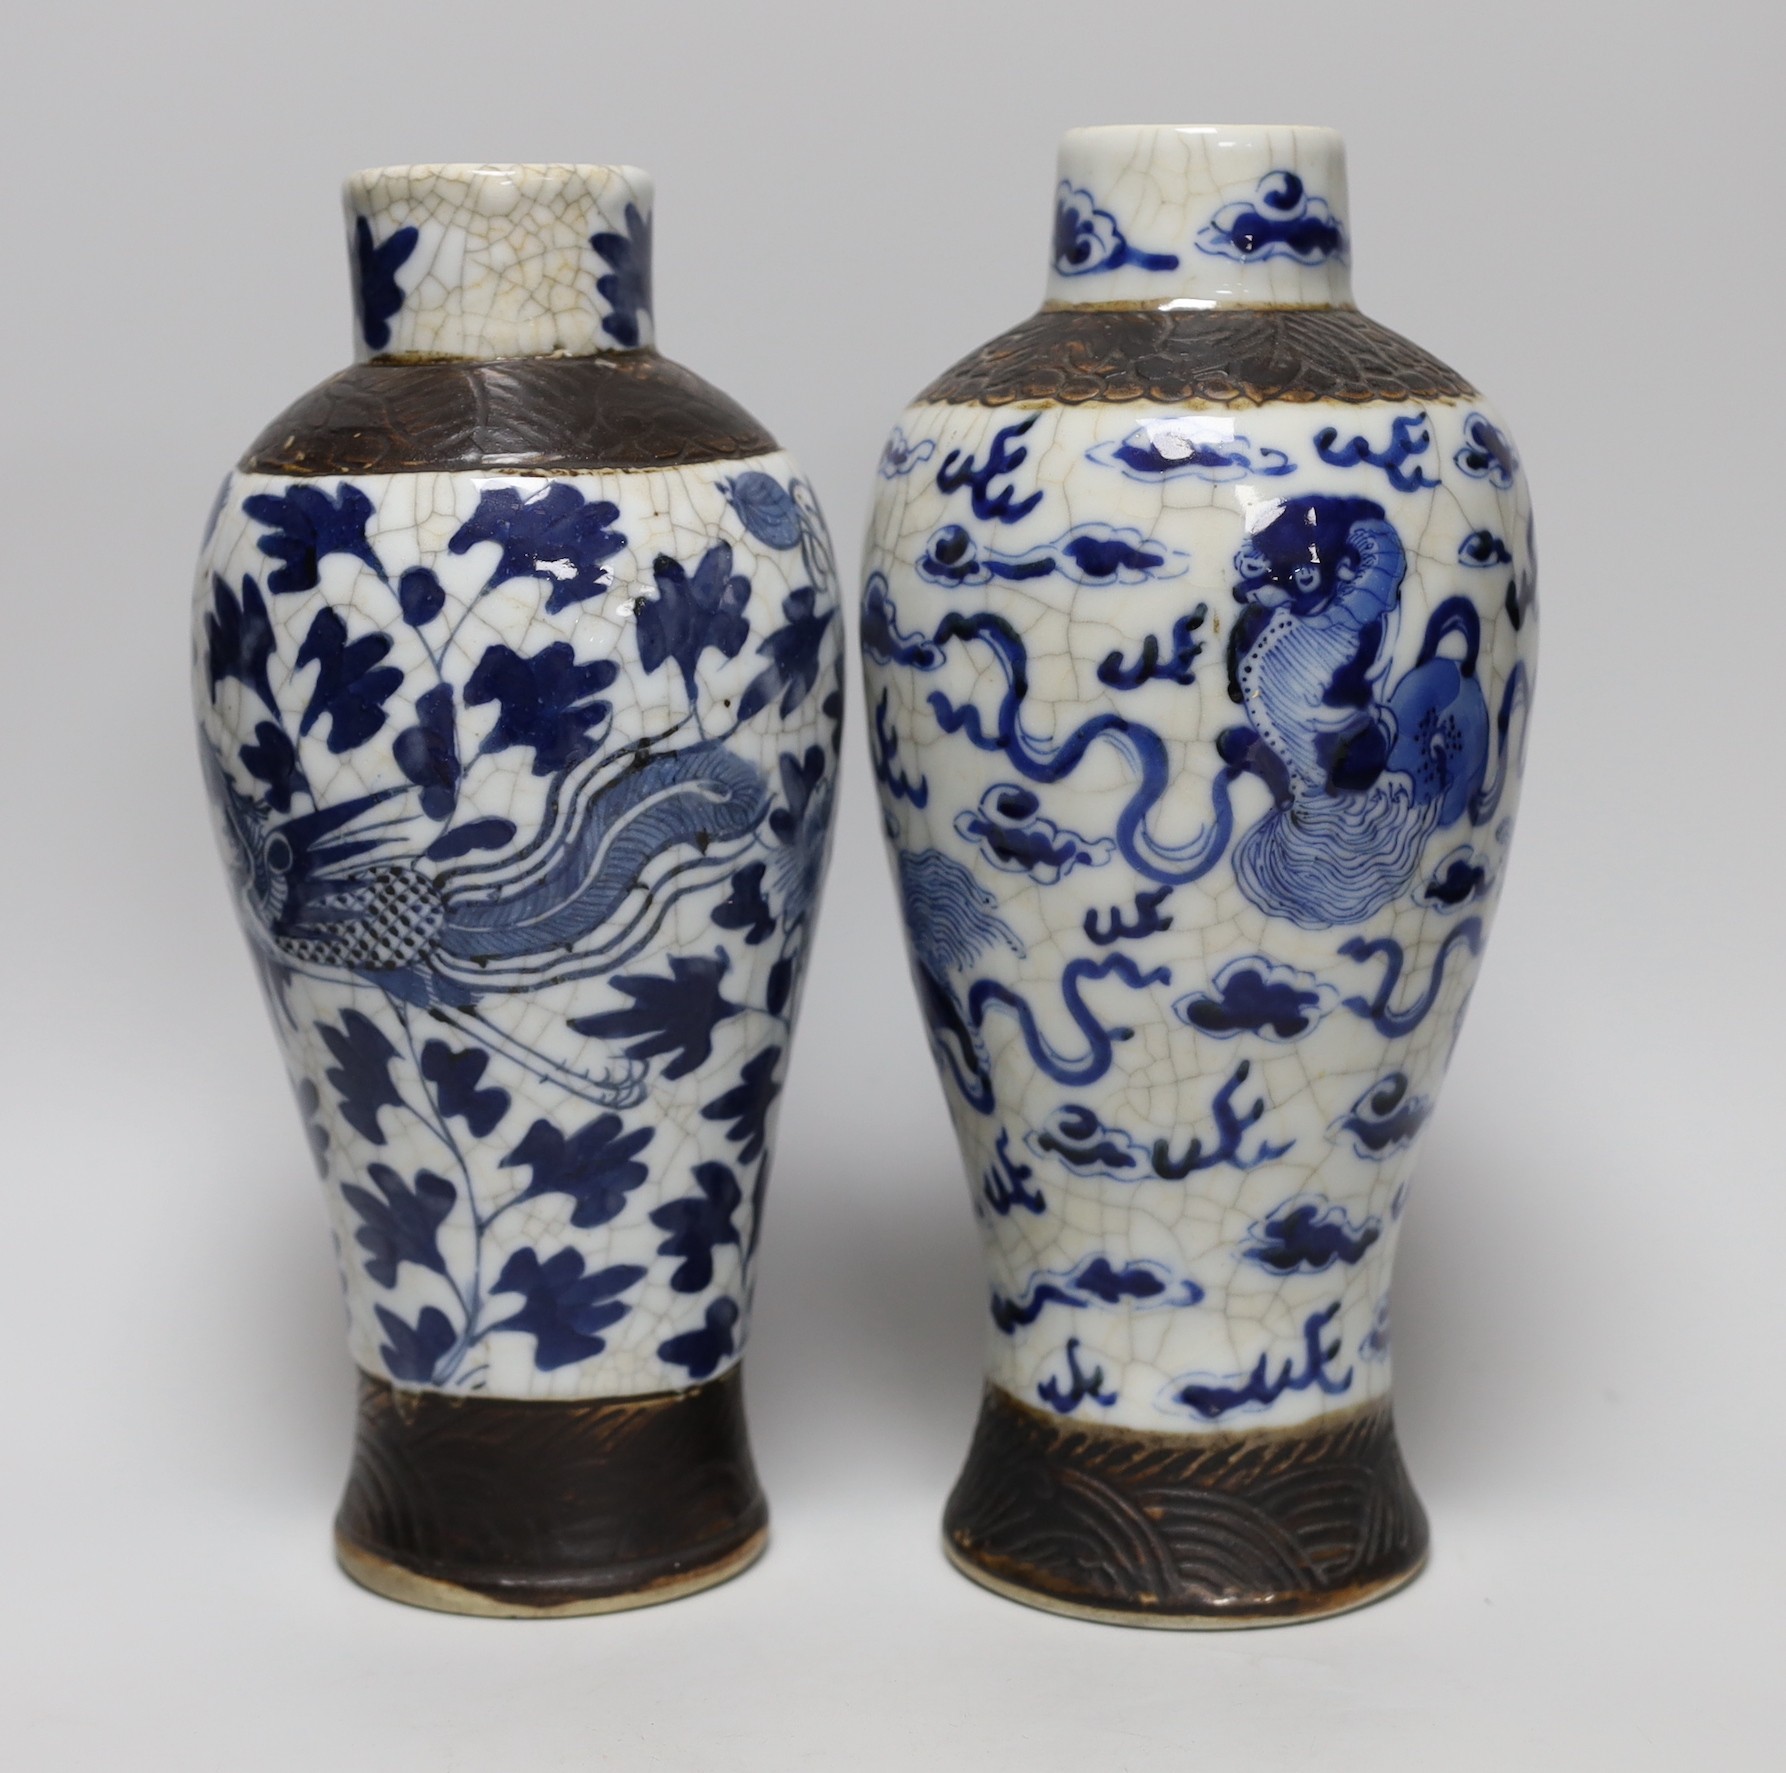 A pair of 19th century Chinese crackleglaze blue and white vases, 27cm - Image 2 of 4